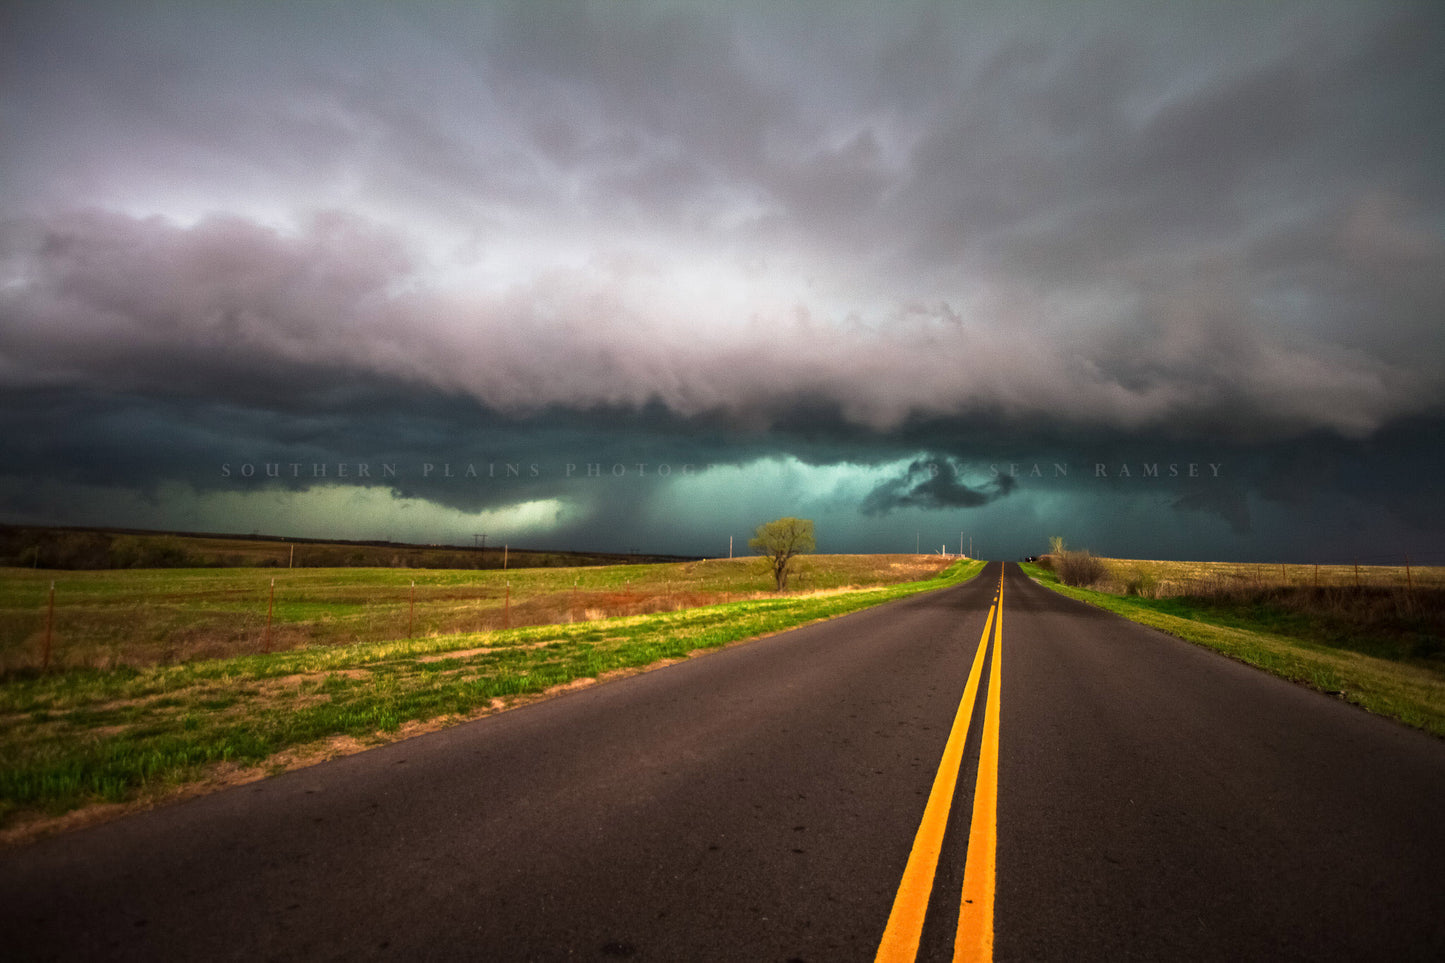 Storm photography print of a highway leading to an intense thunderstorm on a stormy evening in Oklahoma by Sean Ramsey of Southern Plains Photography.